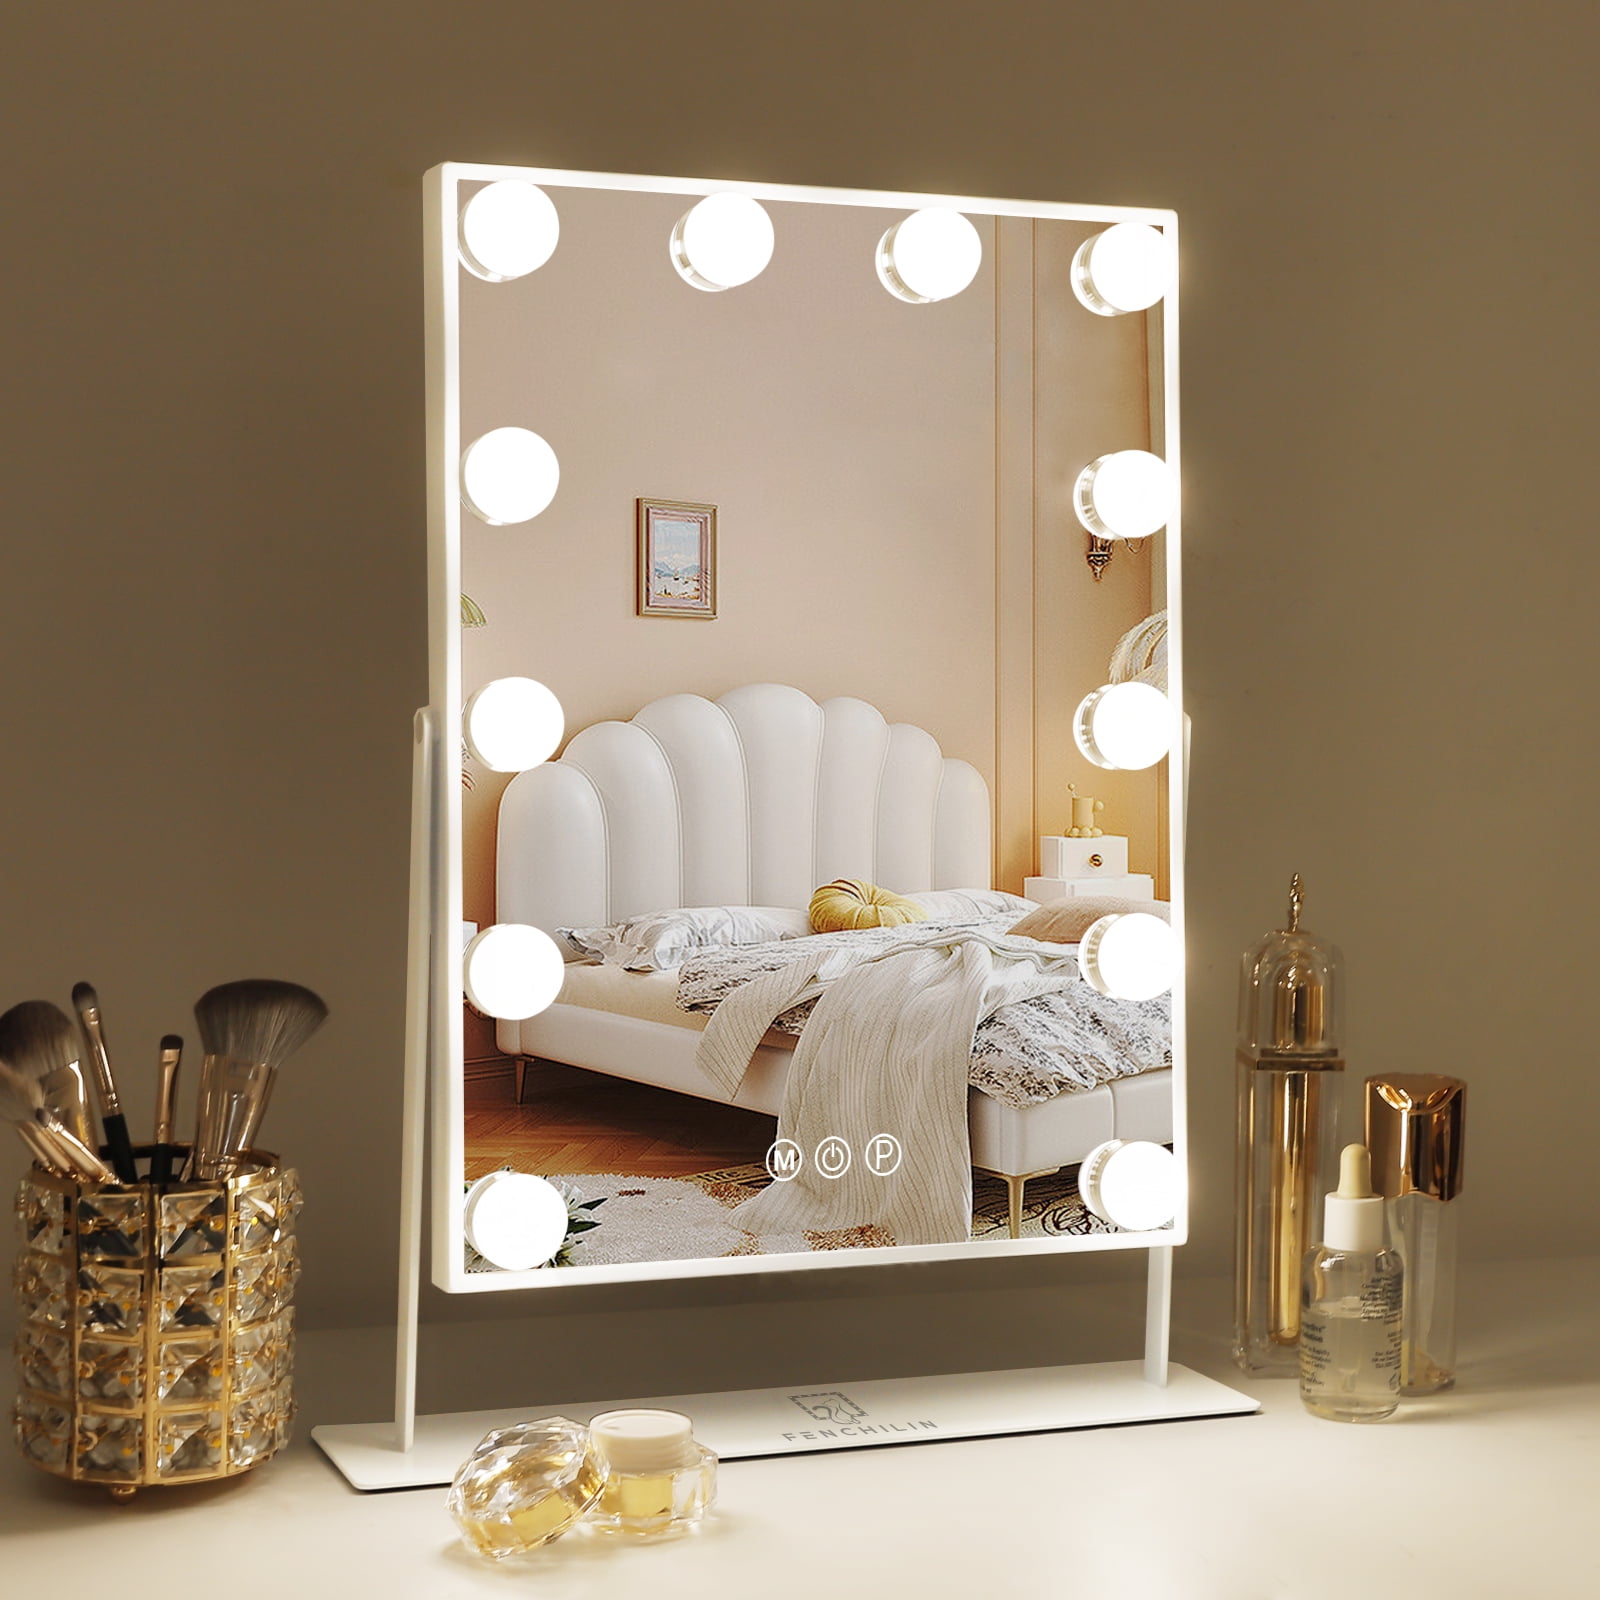 Fenchilin Hollywood Vanity Makeup Mirror with Lights Metal